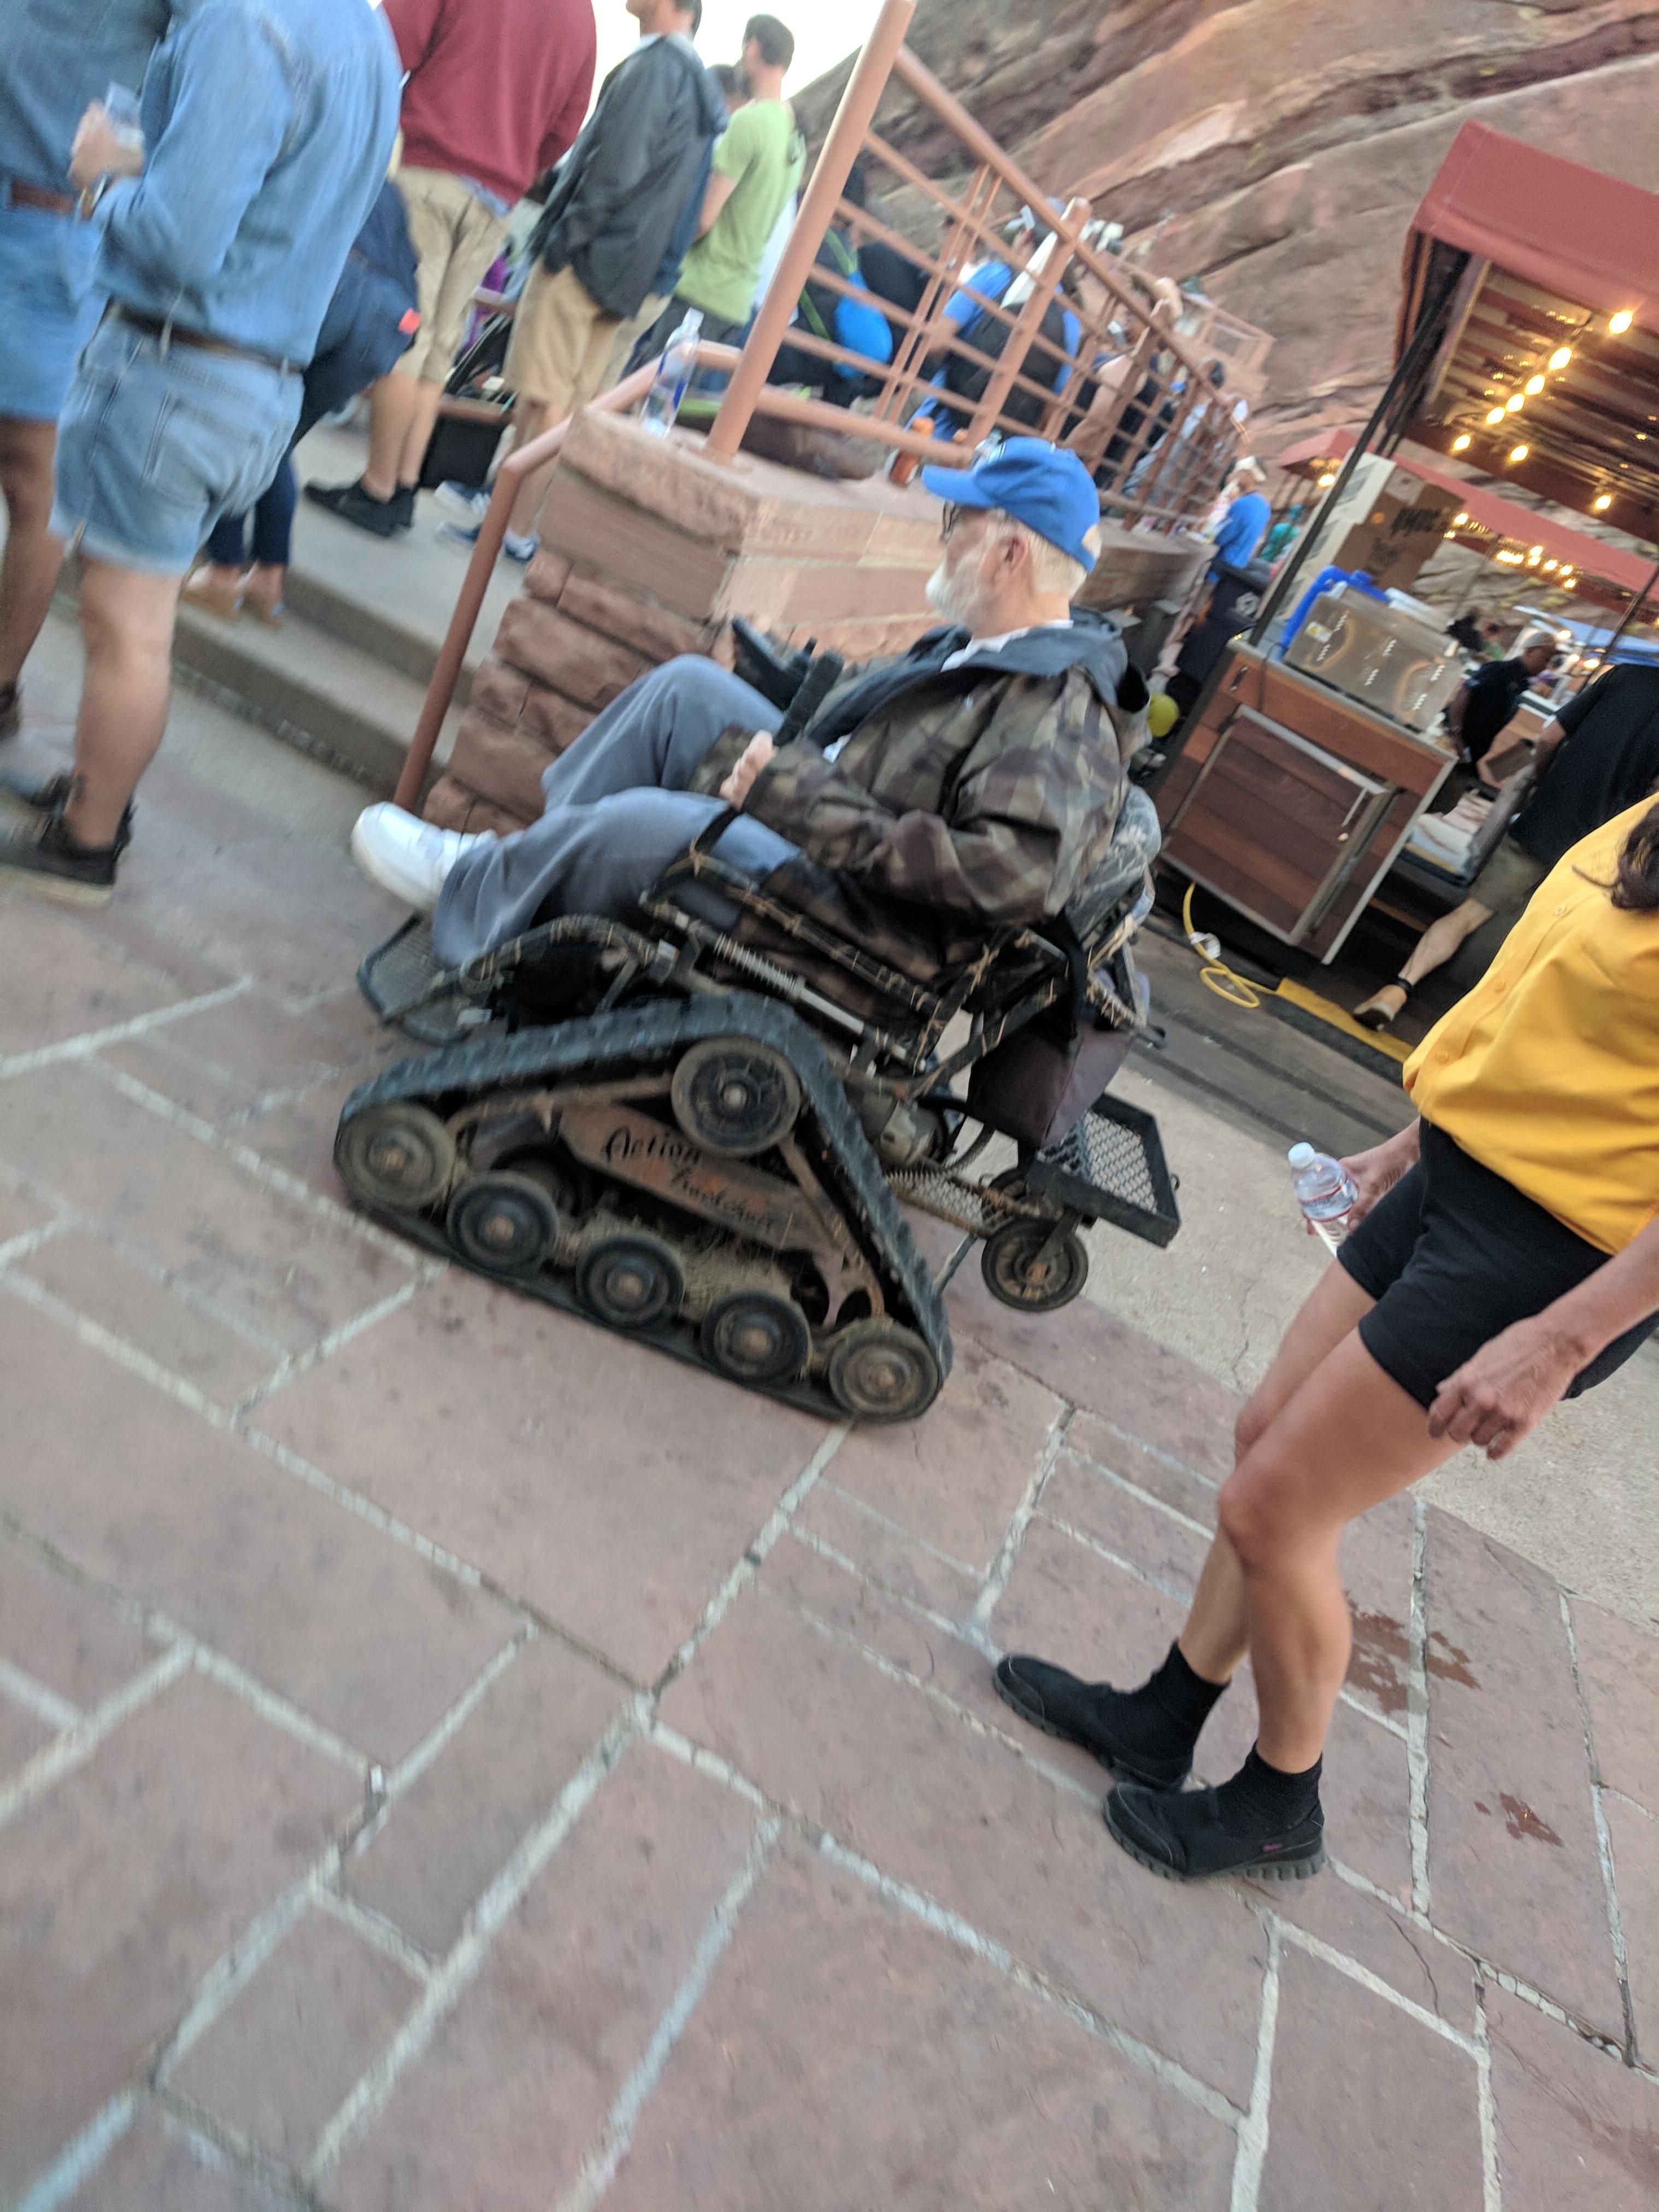 This vet's awesome wheelchair at Red Rocks Ampitheater